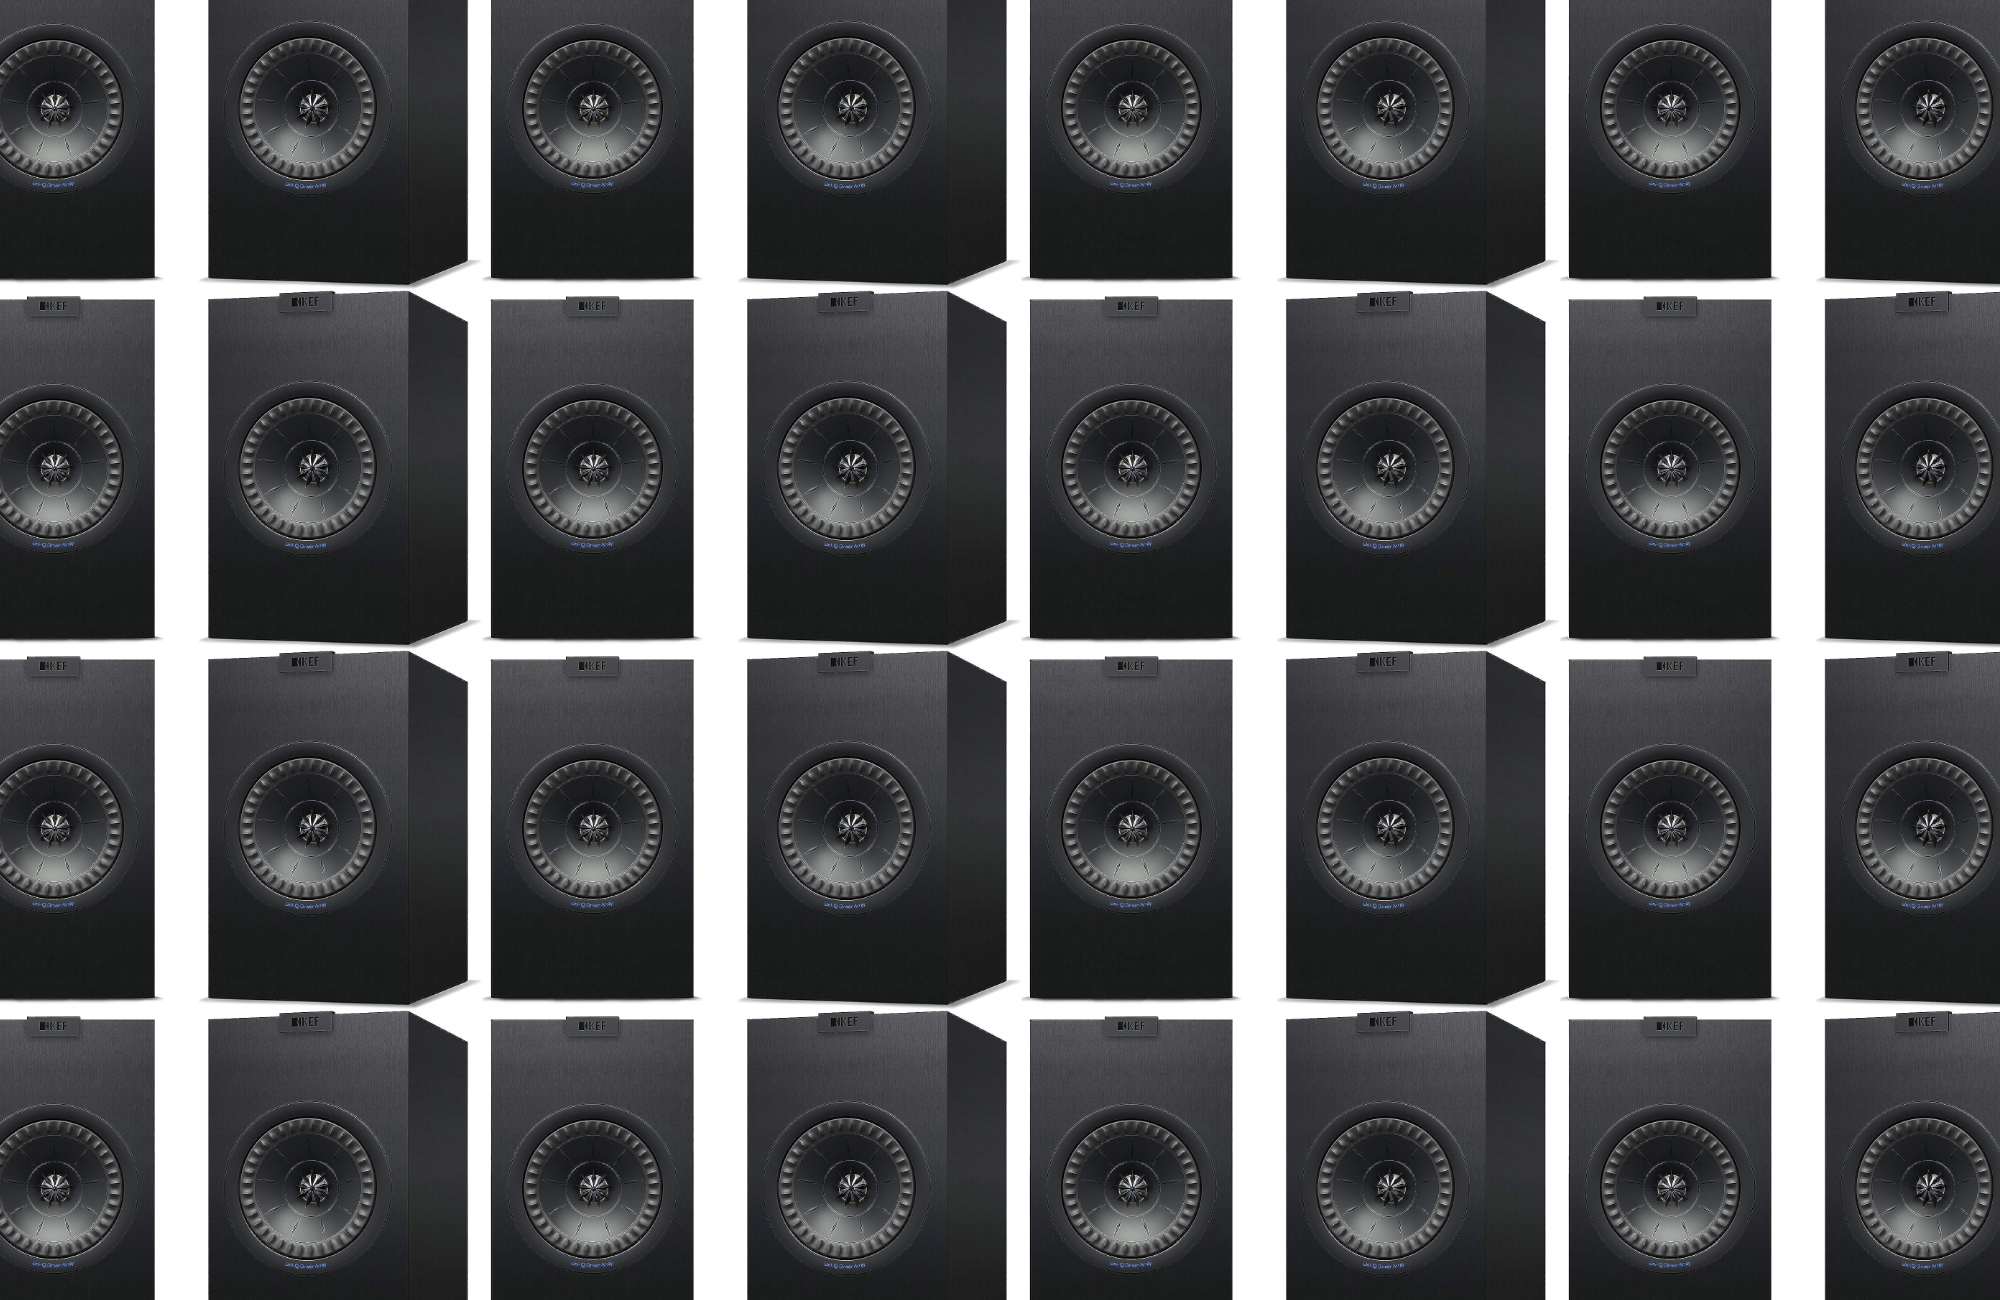 Now hear this: You can score great early Black Friday audio deals right now